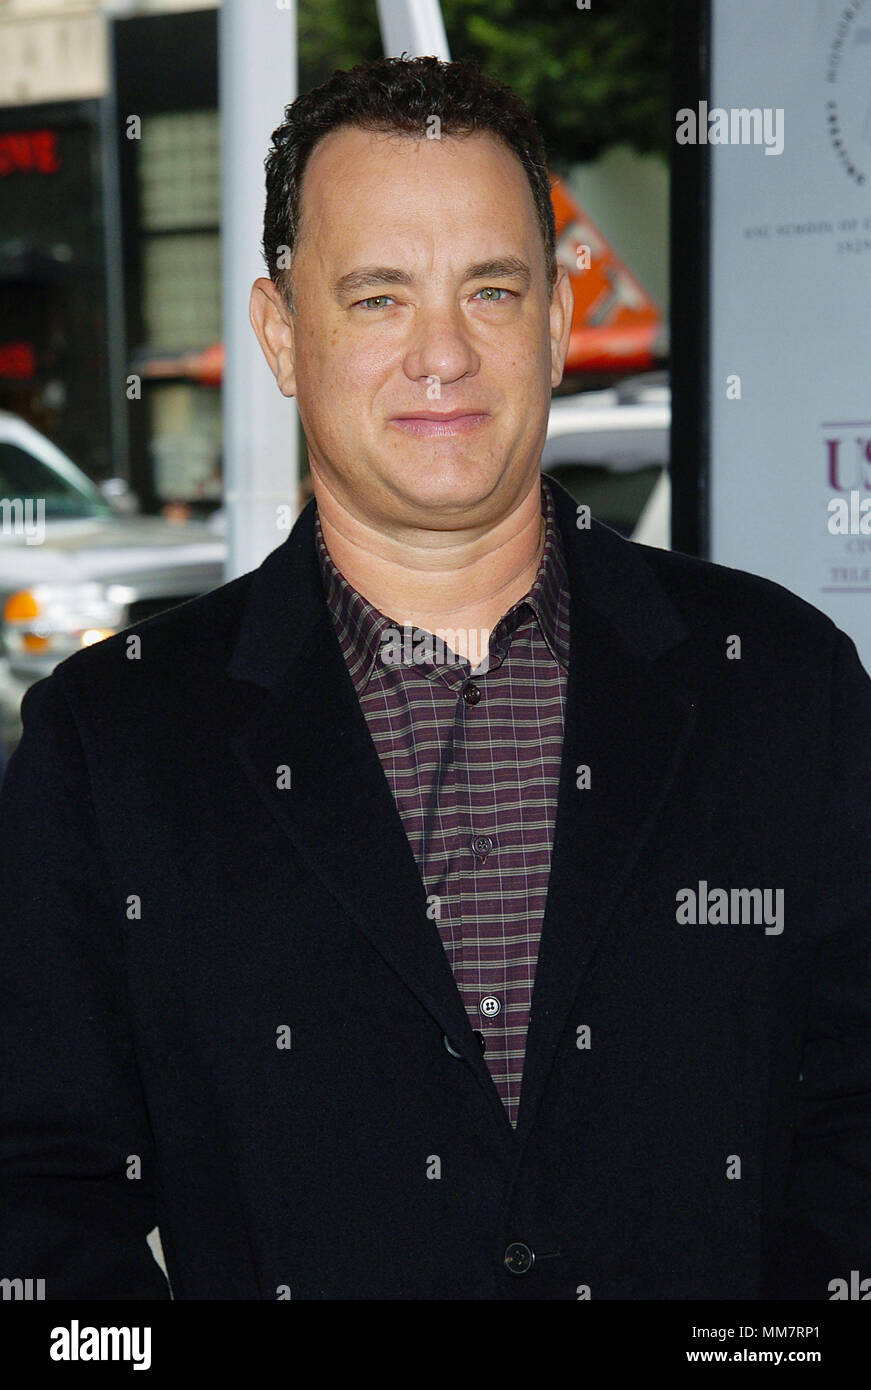 Tom Hanks arriving at the Polar Express Premiere at The Grauman Chinese  Theatre in Los Angeles. 11/07/2004. 08HanksTom086 Red Carpet Event,  Vertical, USA, Film Industry, Celebrities, Photography, Bestof, Arts  Culture and Entertainment